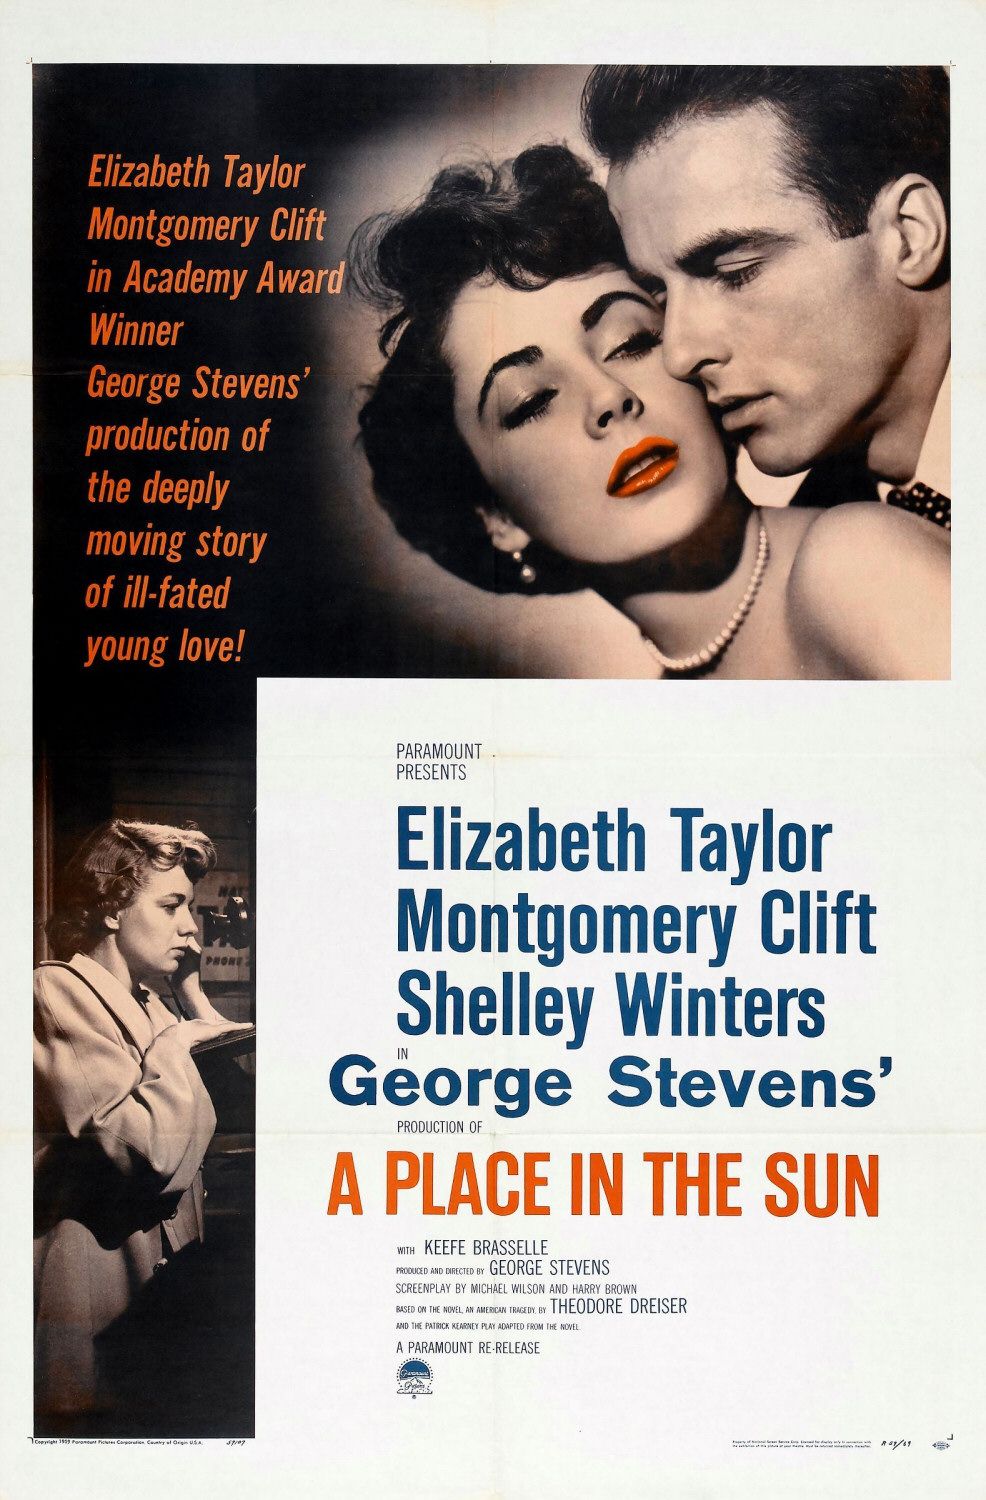 A Place in the Sun (1951) starring Elizabeth Taylor on DVD on DVD